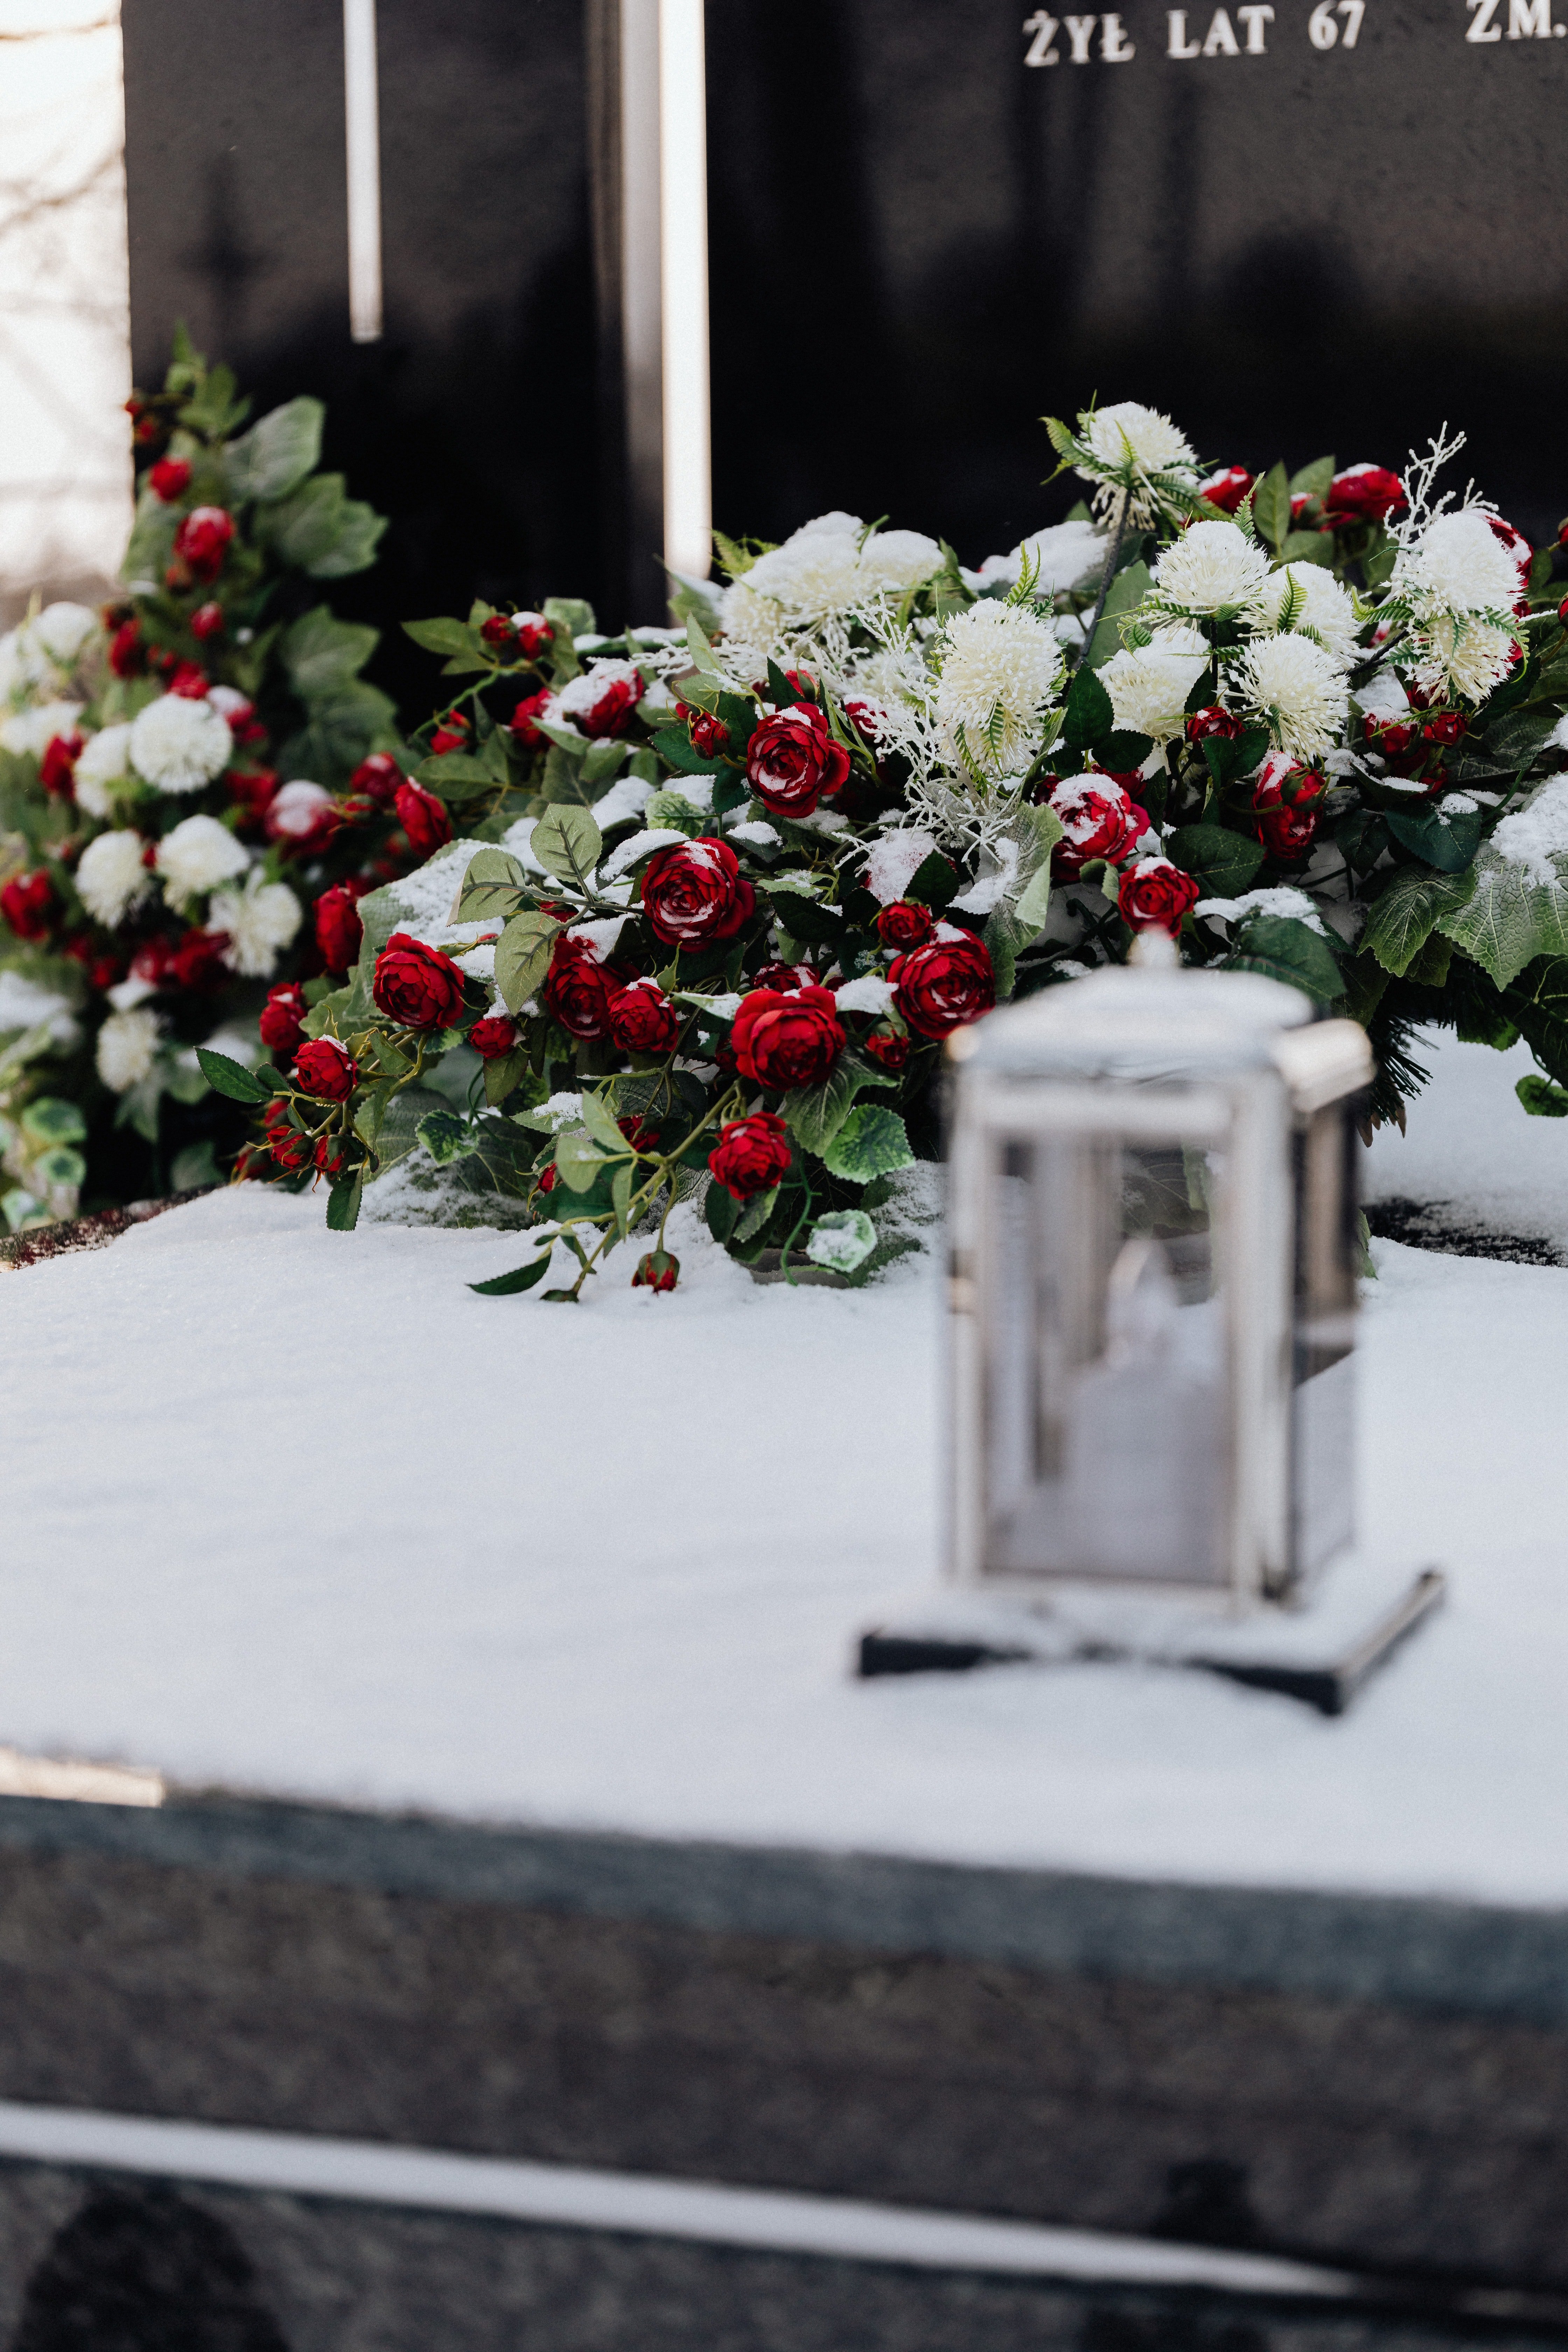 Red, white and green flowers on a flat surface. | Photo: Pexels